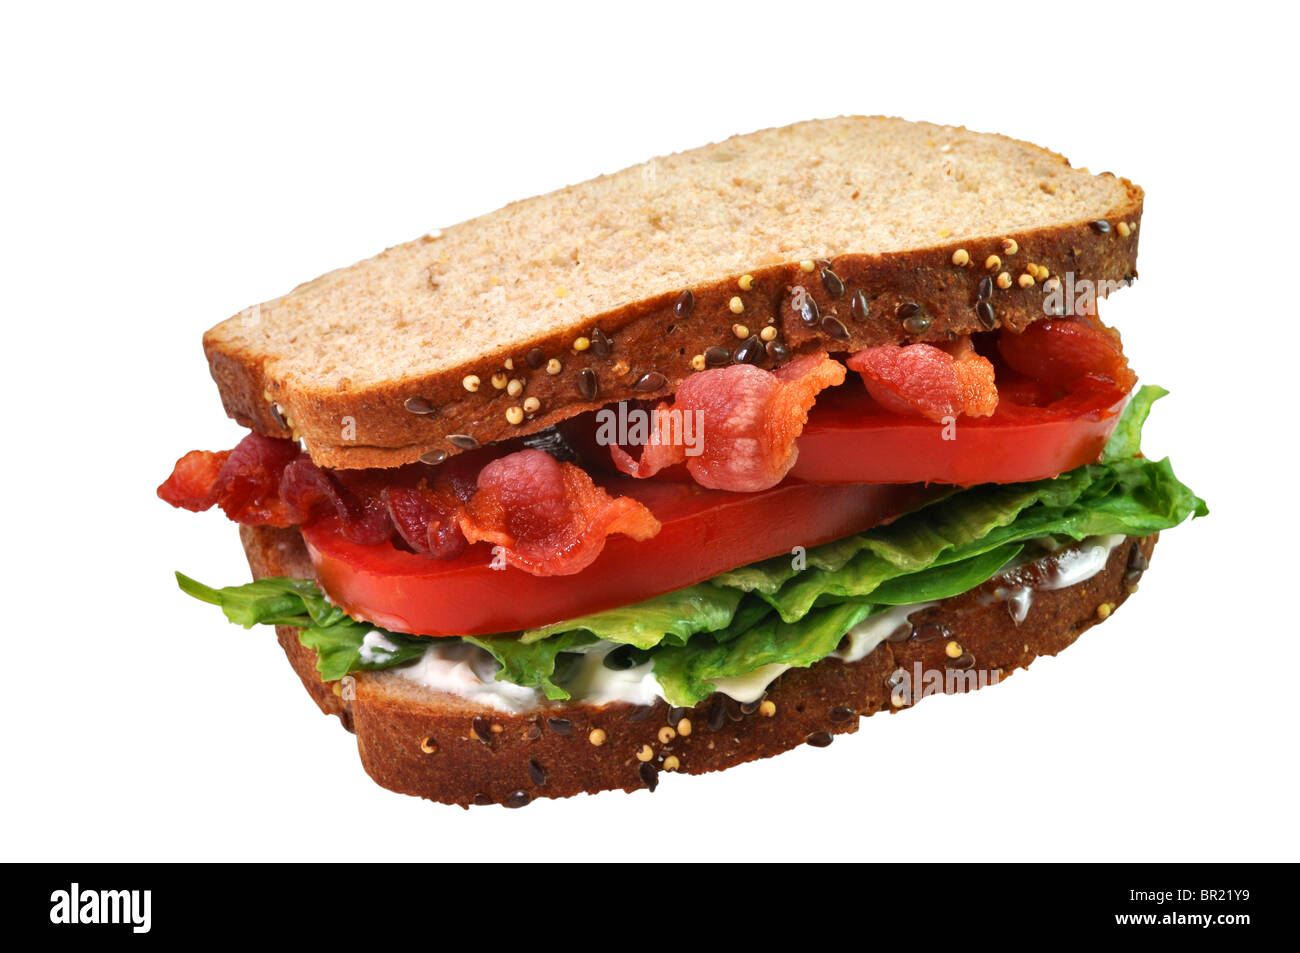 Bacon, lettuce, and tomato sandwich. Isolated on white background with clipping path. Stock Photo